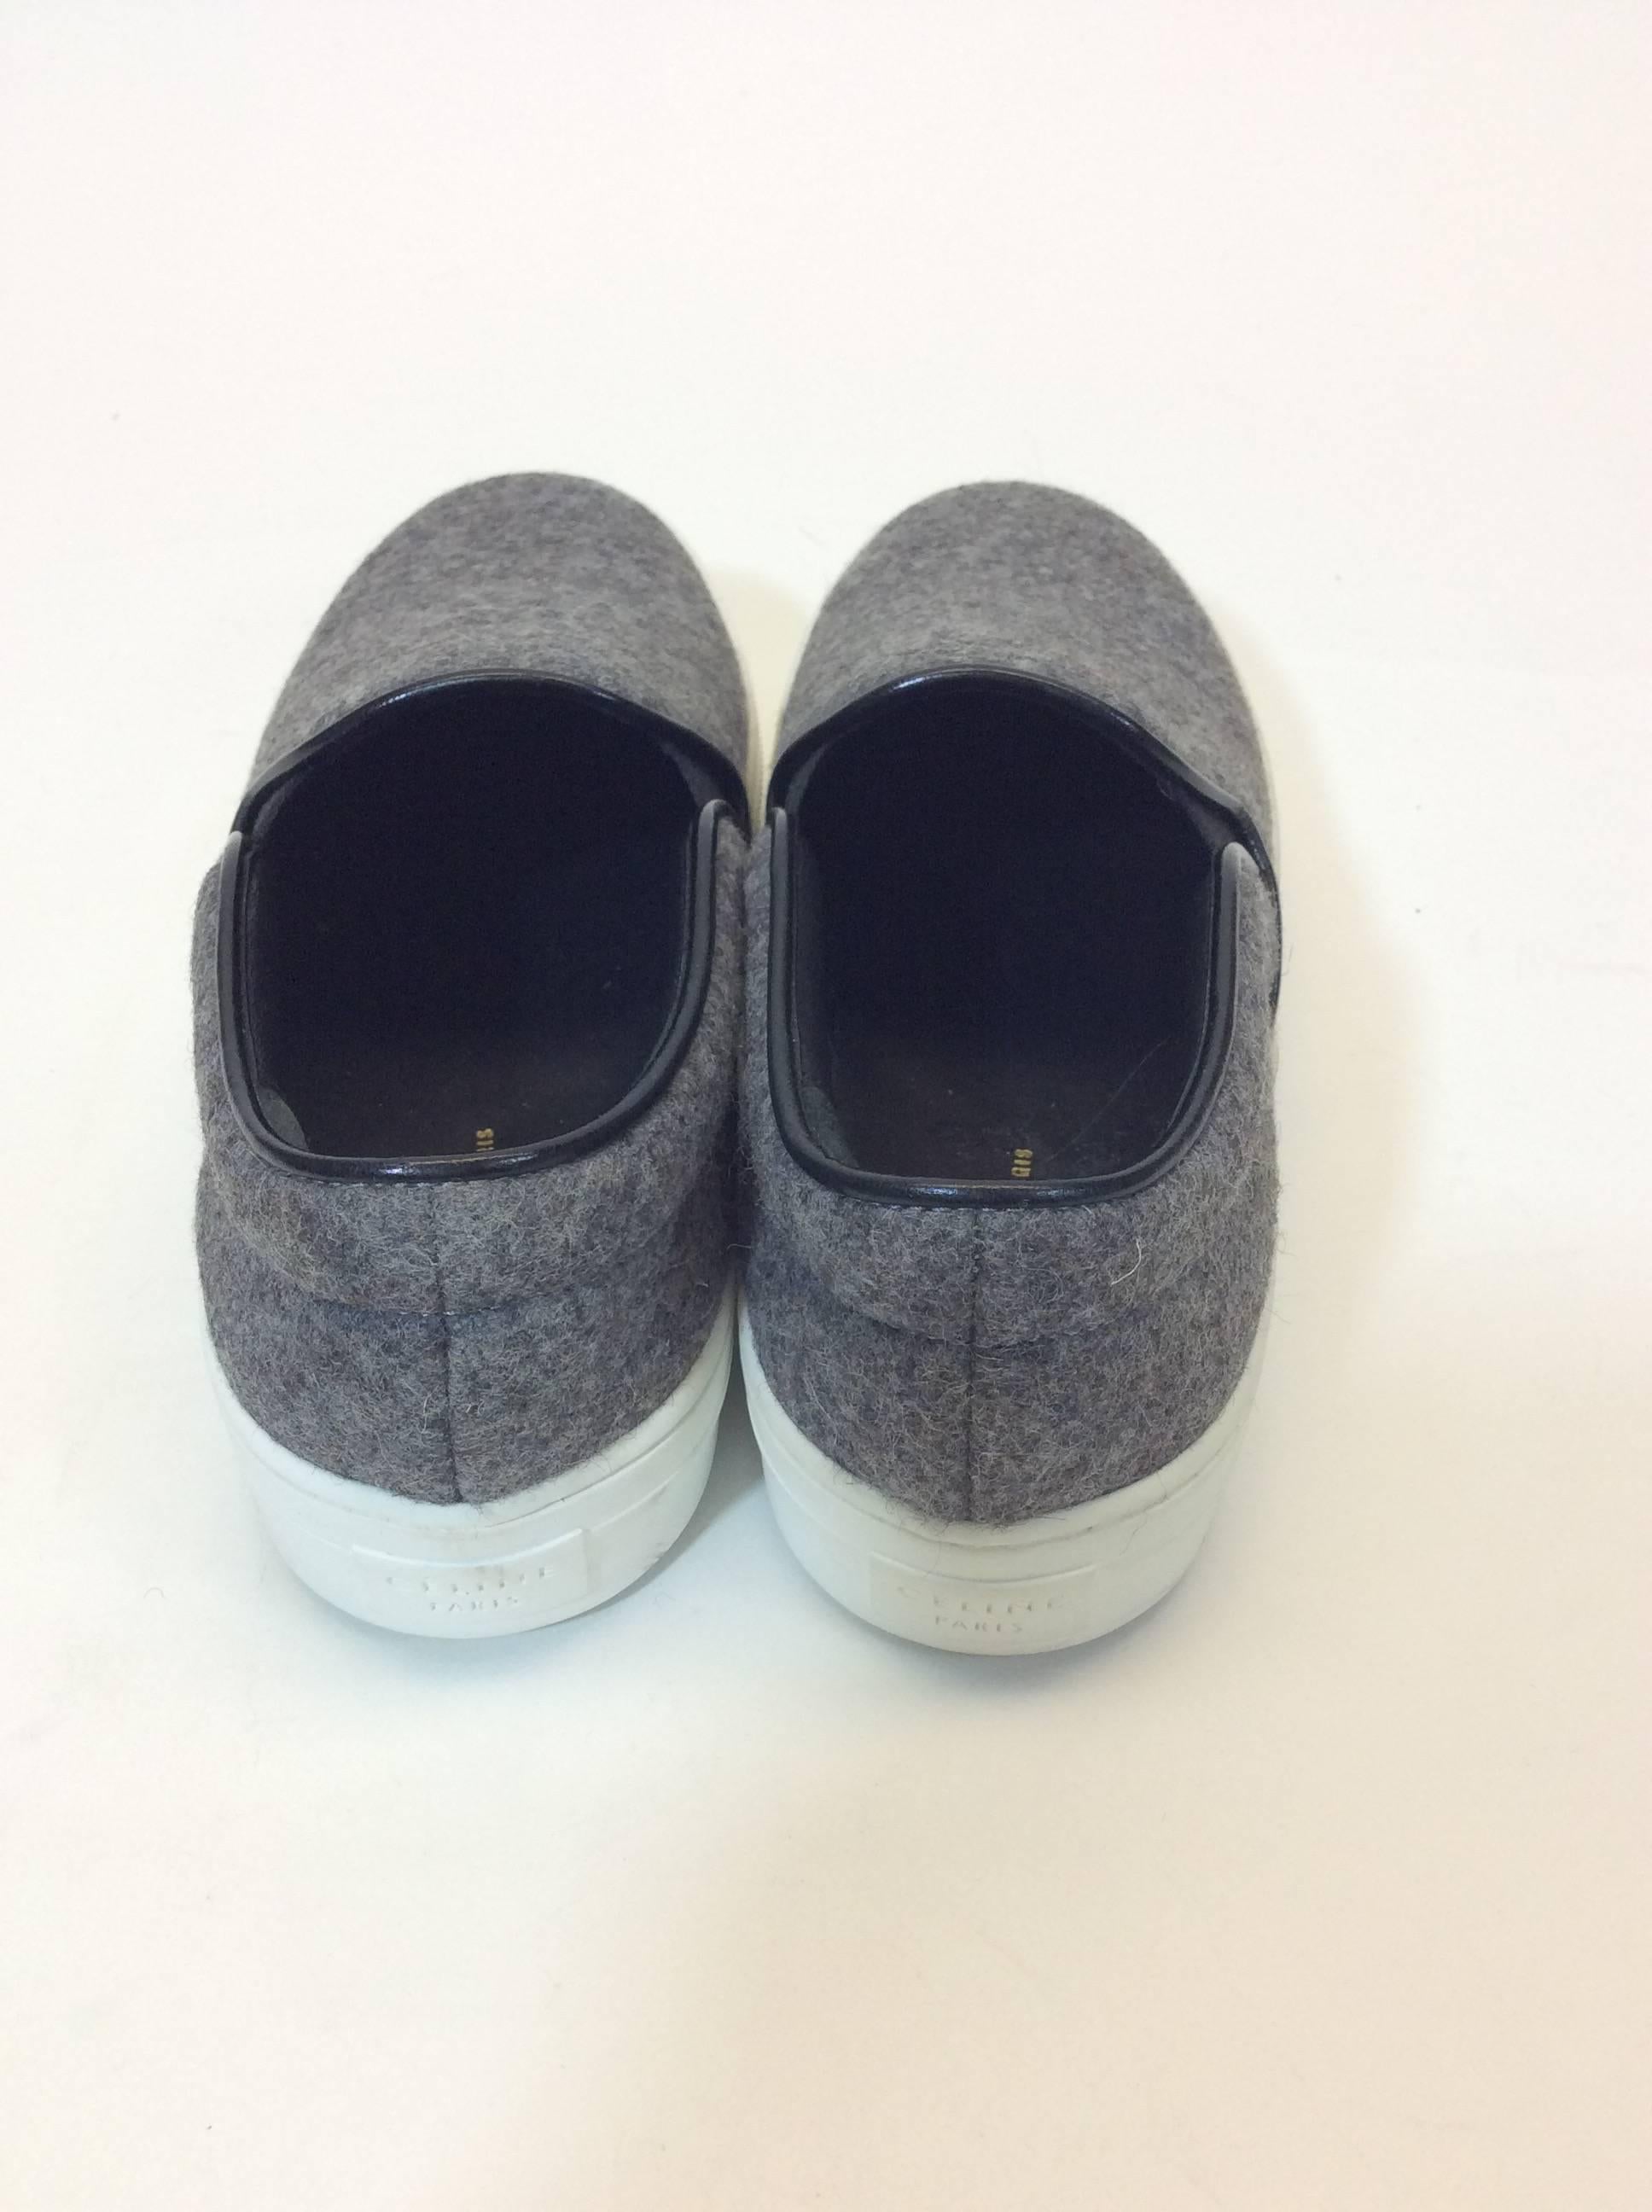 Celine Skate Slip on Grey Felt Sneakers In Excellent Condition For Sale In Narberth, PA